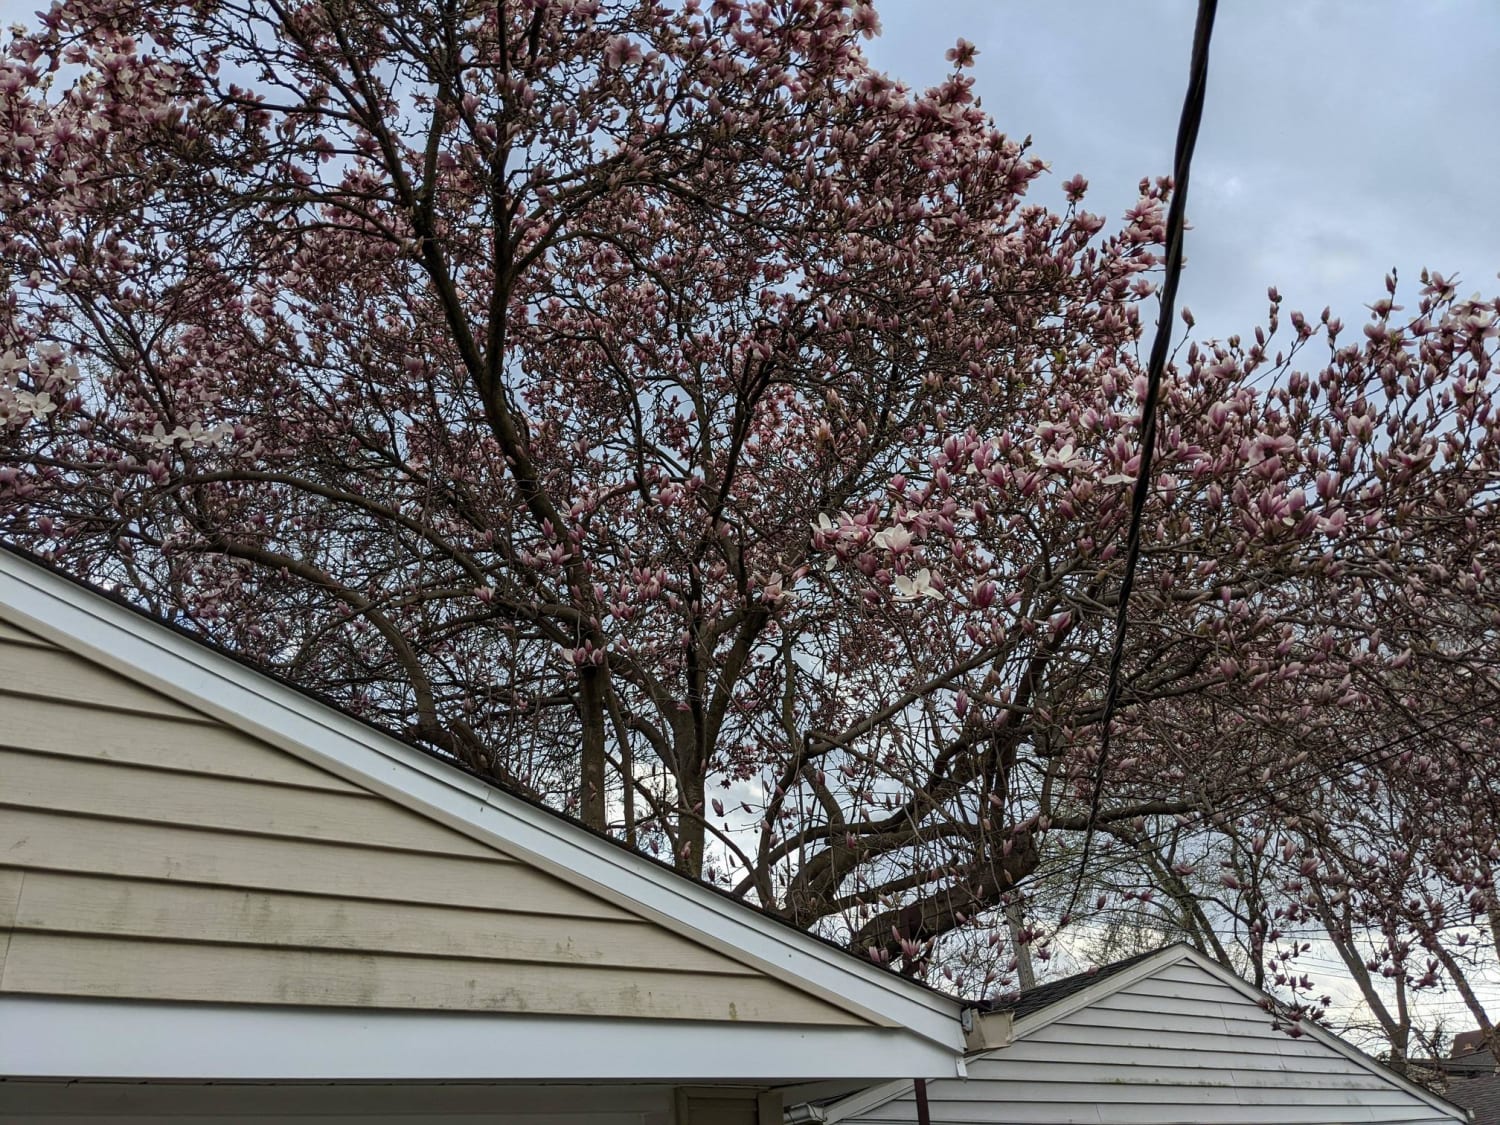 Just found out I have a beautiful Magnolia tree in the backyard of my new house